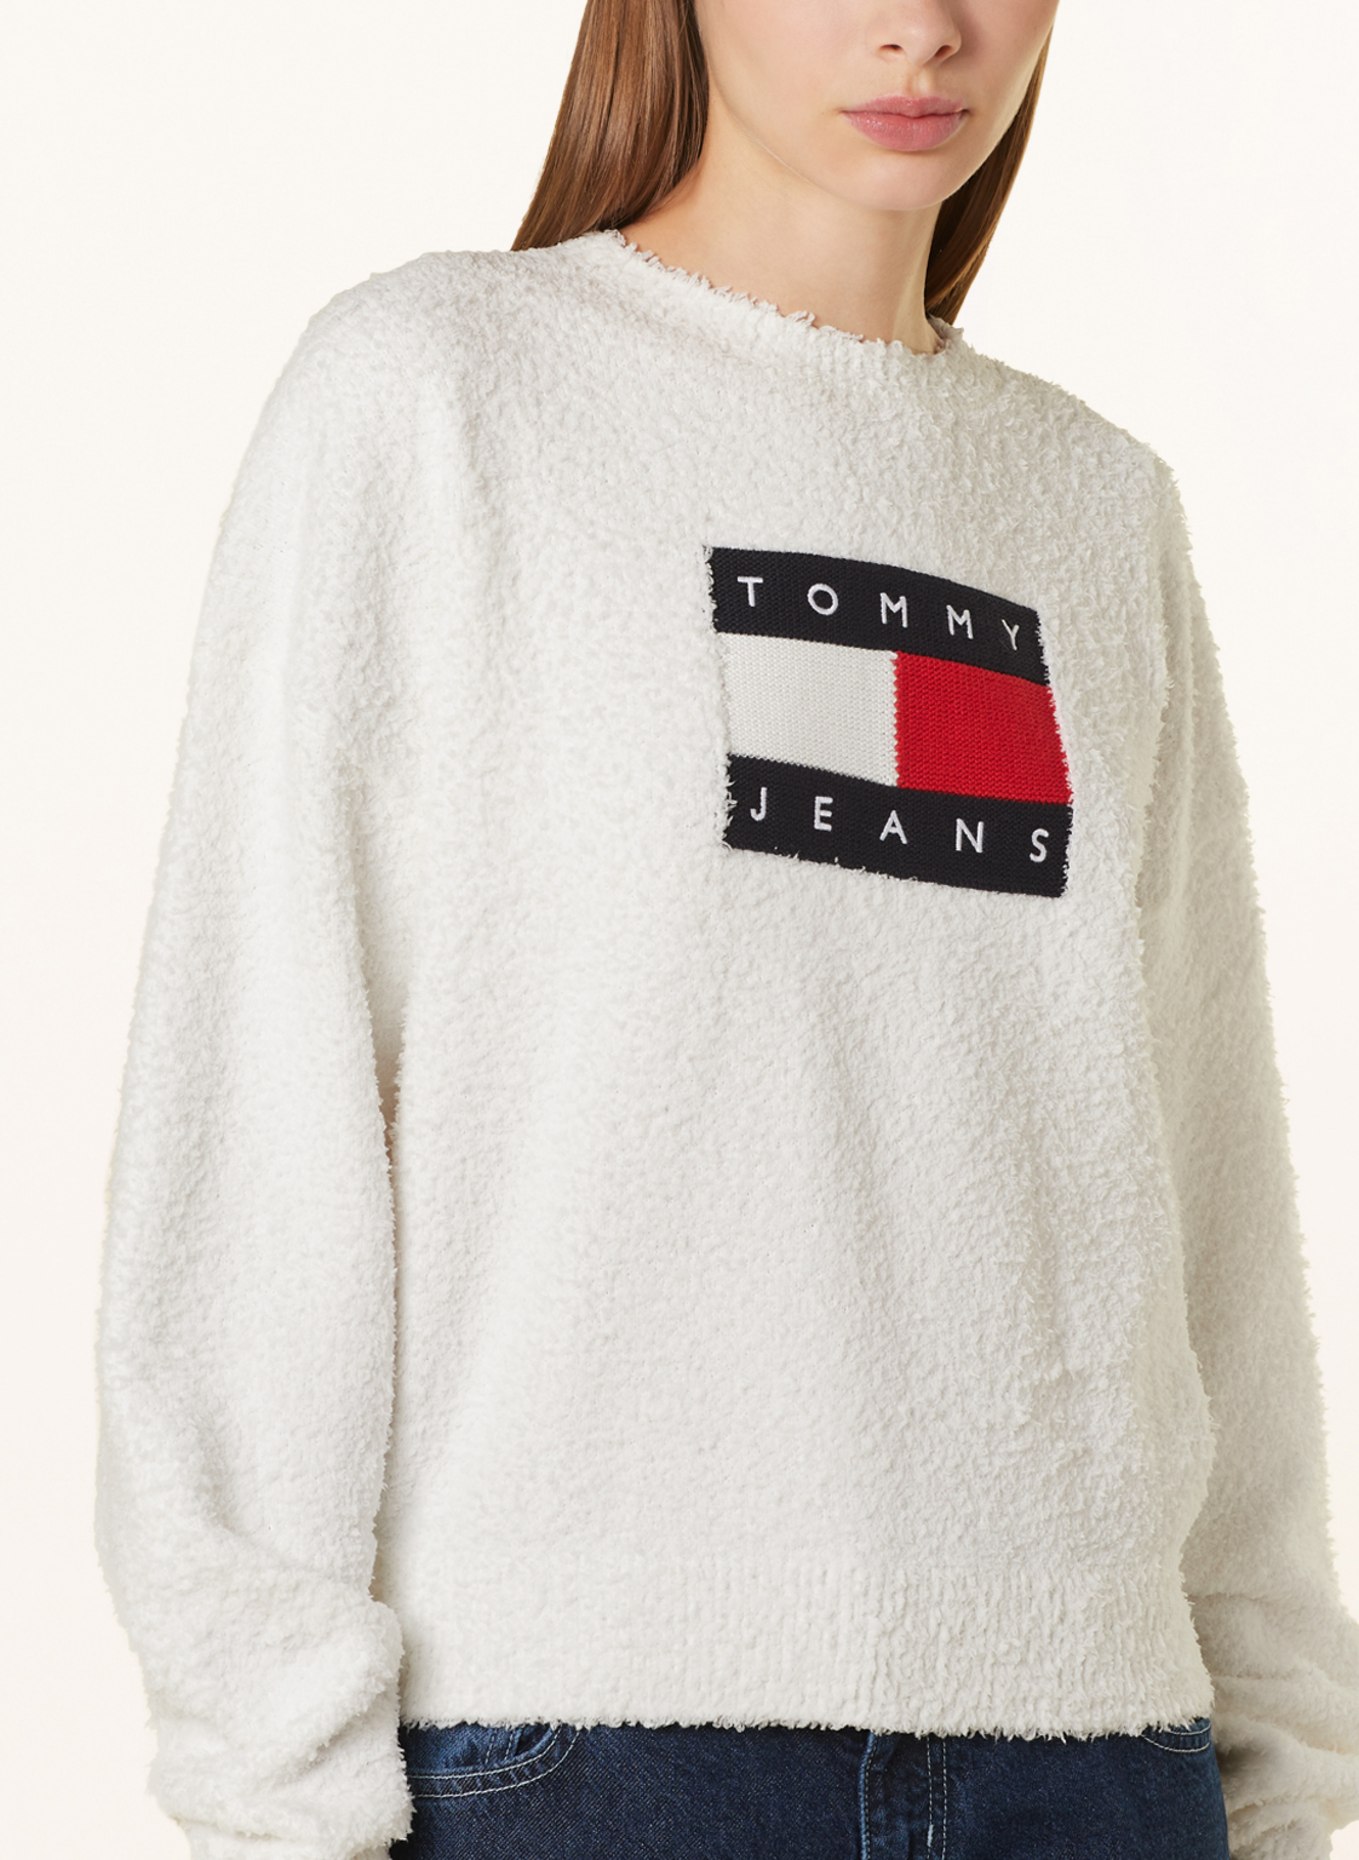 TOMMY JEANS Pullover, Farbe: WEISS/ DUNKELBLAU/ ROT (Bild 4)